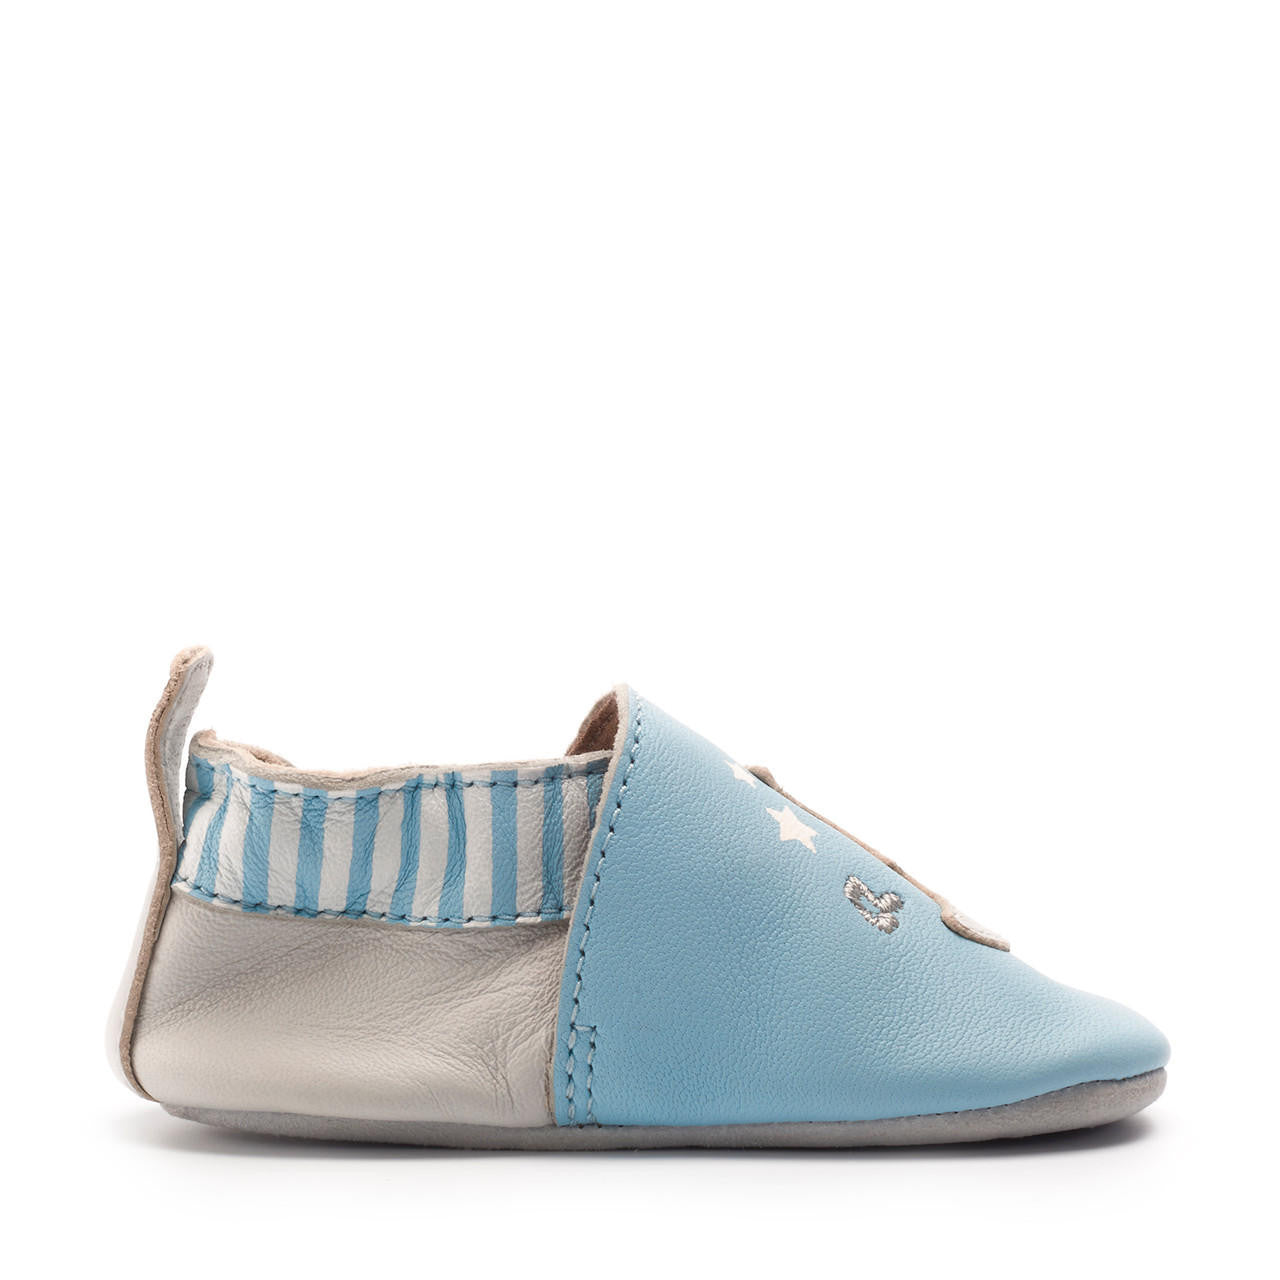 A unisex pram shoe by Start-Rite. Style is fable, a pull on in pale blue leather. Right side view.